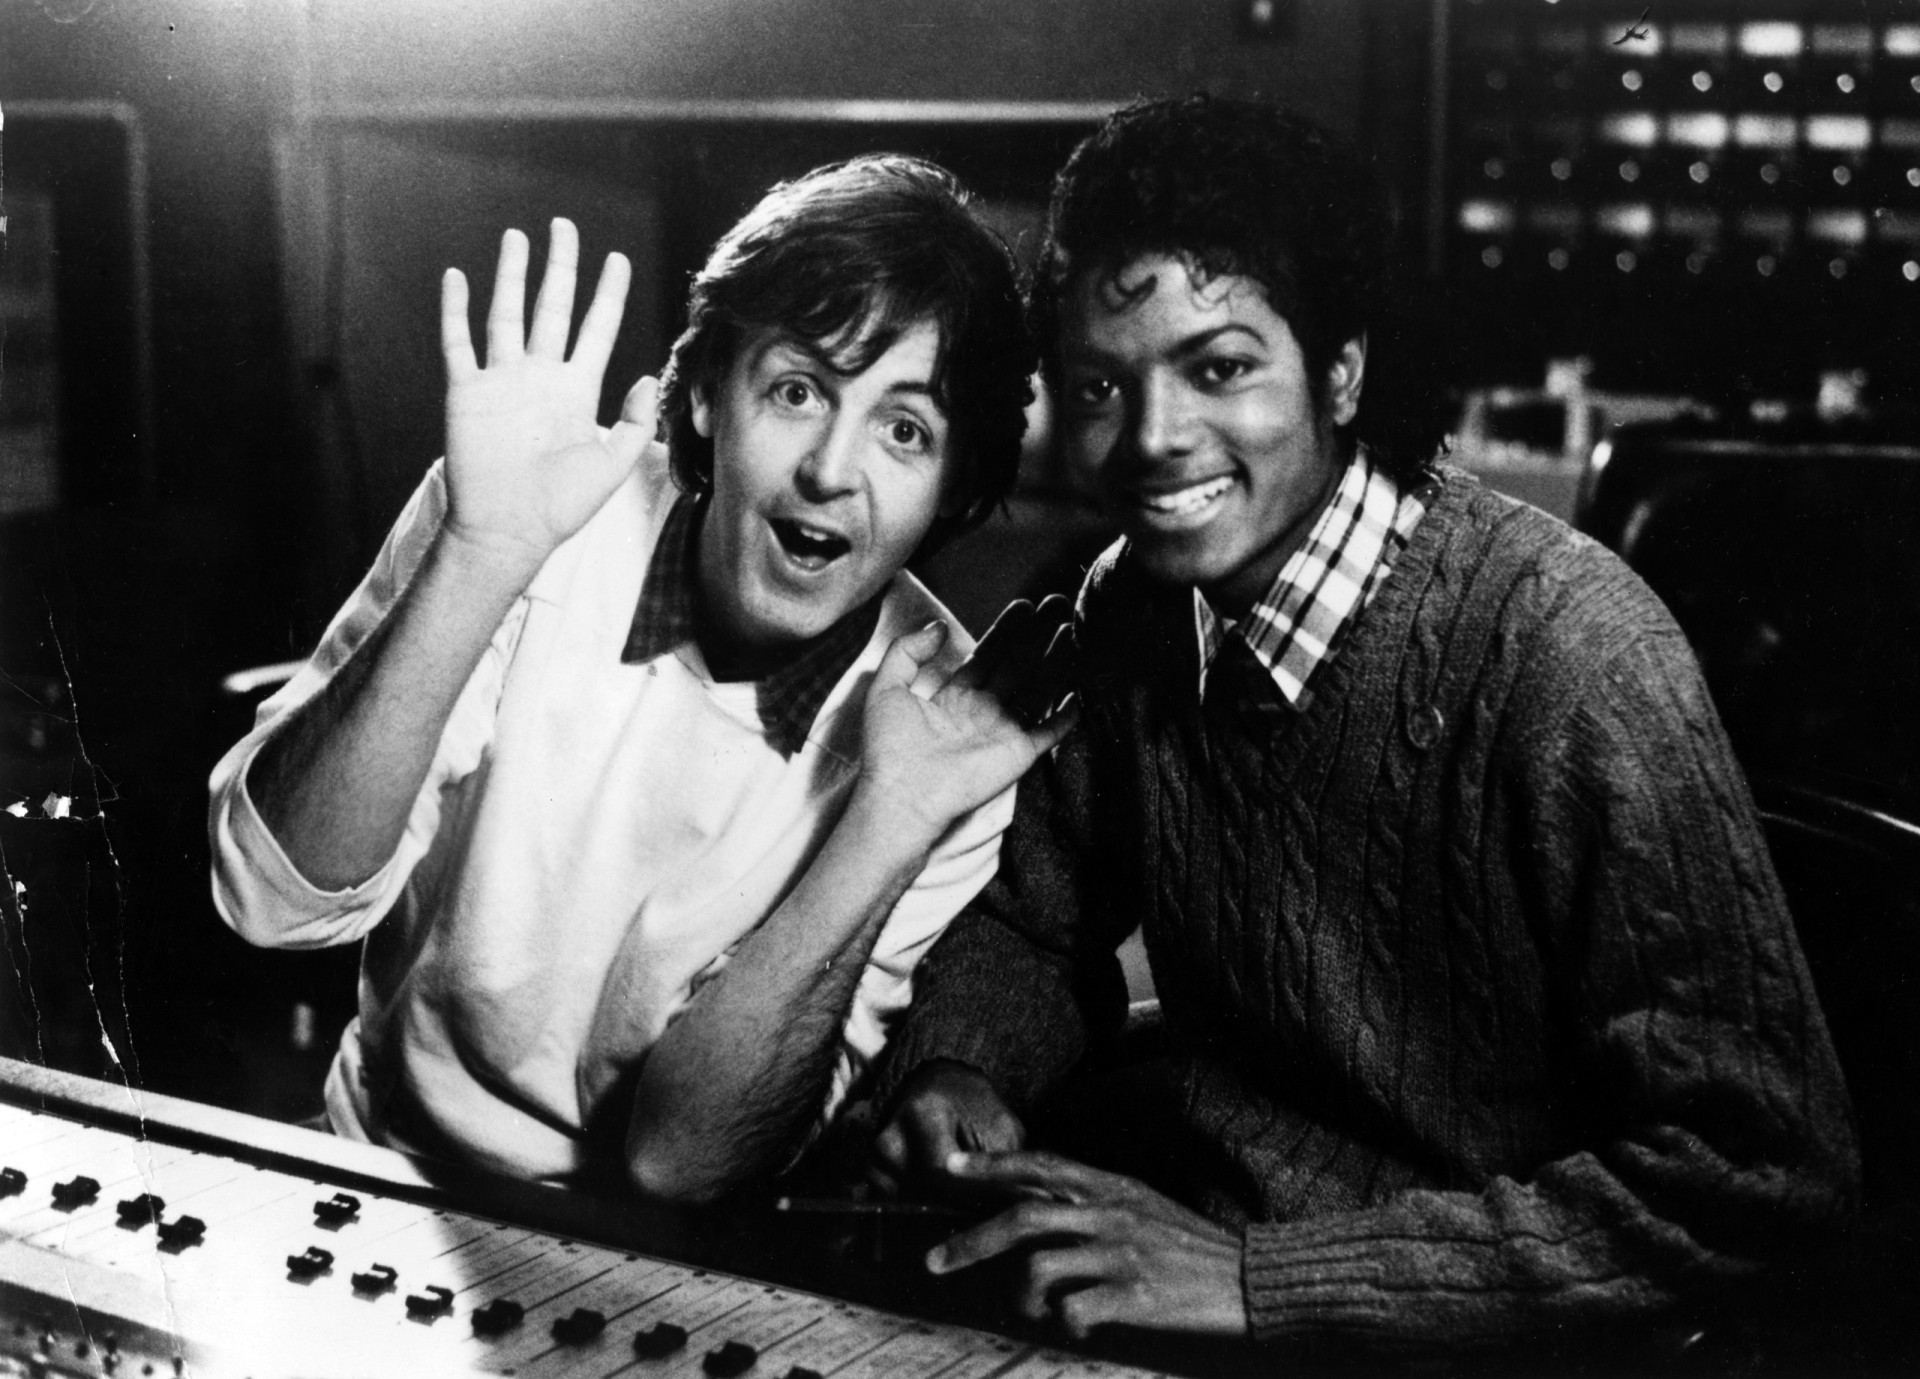 <p>The duo had a strong relationship and collaborated on music for an extended period. During this time, McCartney gave Jackson guidance on music rights investment. Sometime after, Jackson infuriated McCartney when he purchased the rights to numerous Beatles songs, as reported by Mental Floss.</p><p><a href="https://www.msn.com/en-us/community/channel/vid-7xx8mnucu55yw63we9va2gwr7uihbxwc68fxqp25x6tg4ftibpra?cvid=94631541bc0f4f89bfd59158d696ad7e">Follow us and access great exclusive content every day</a></p>